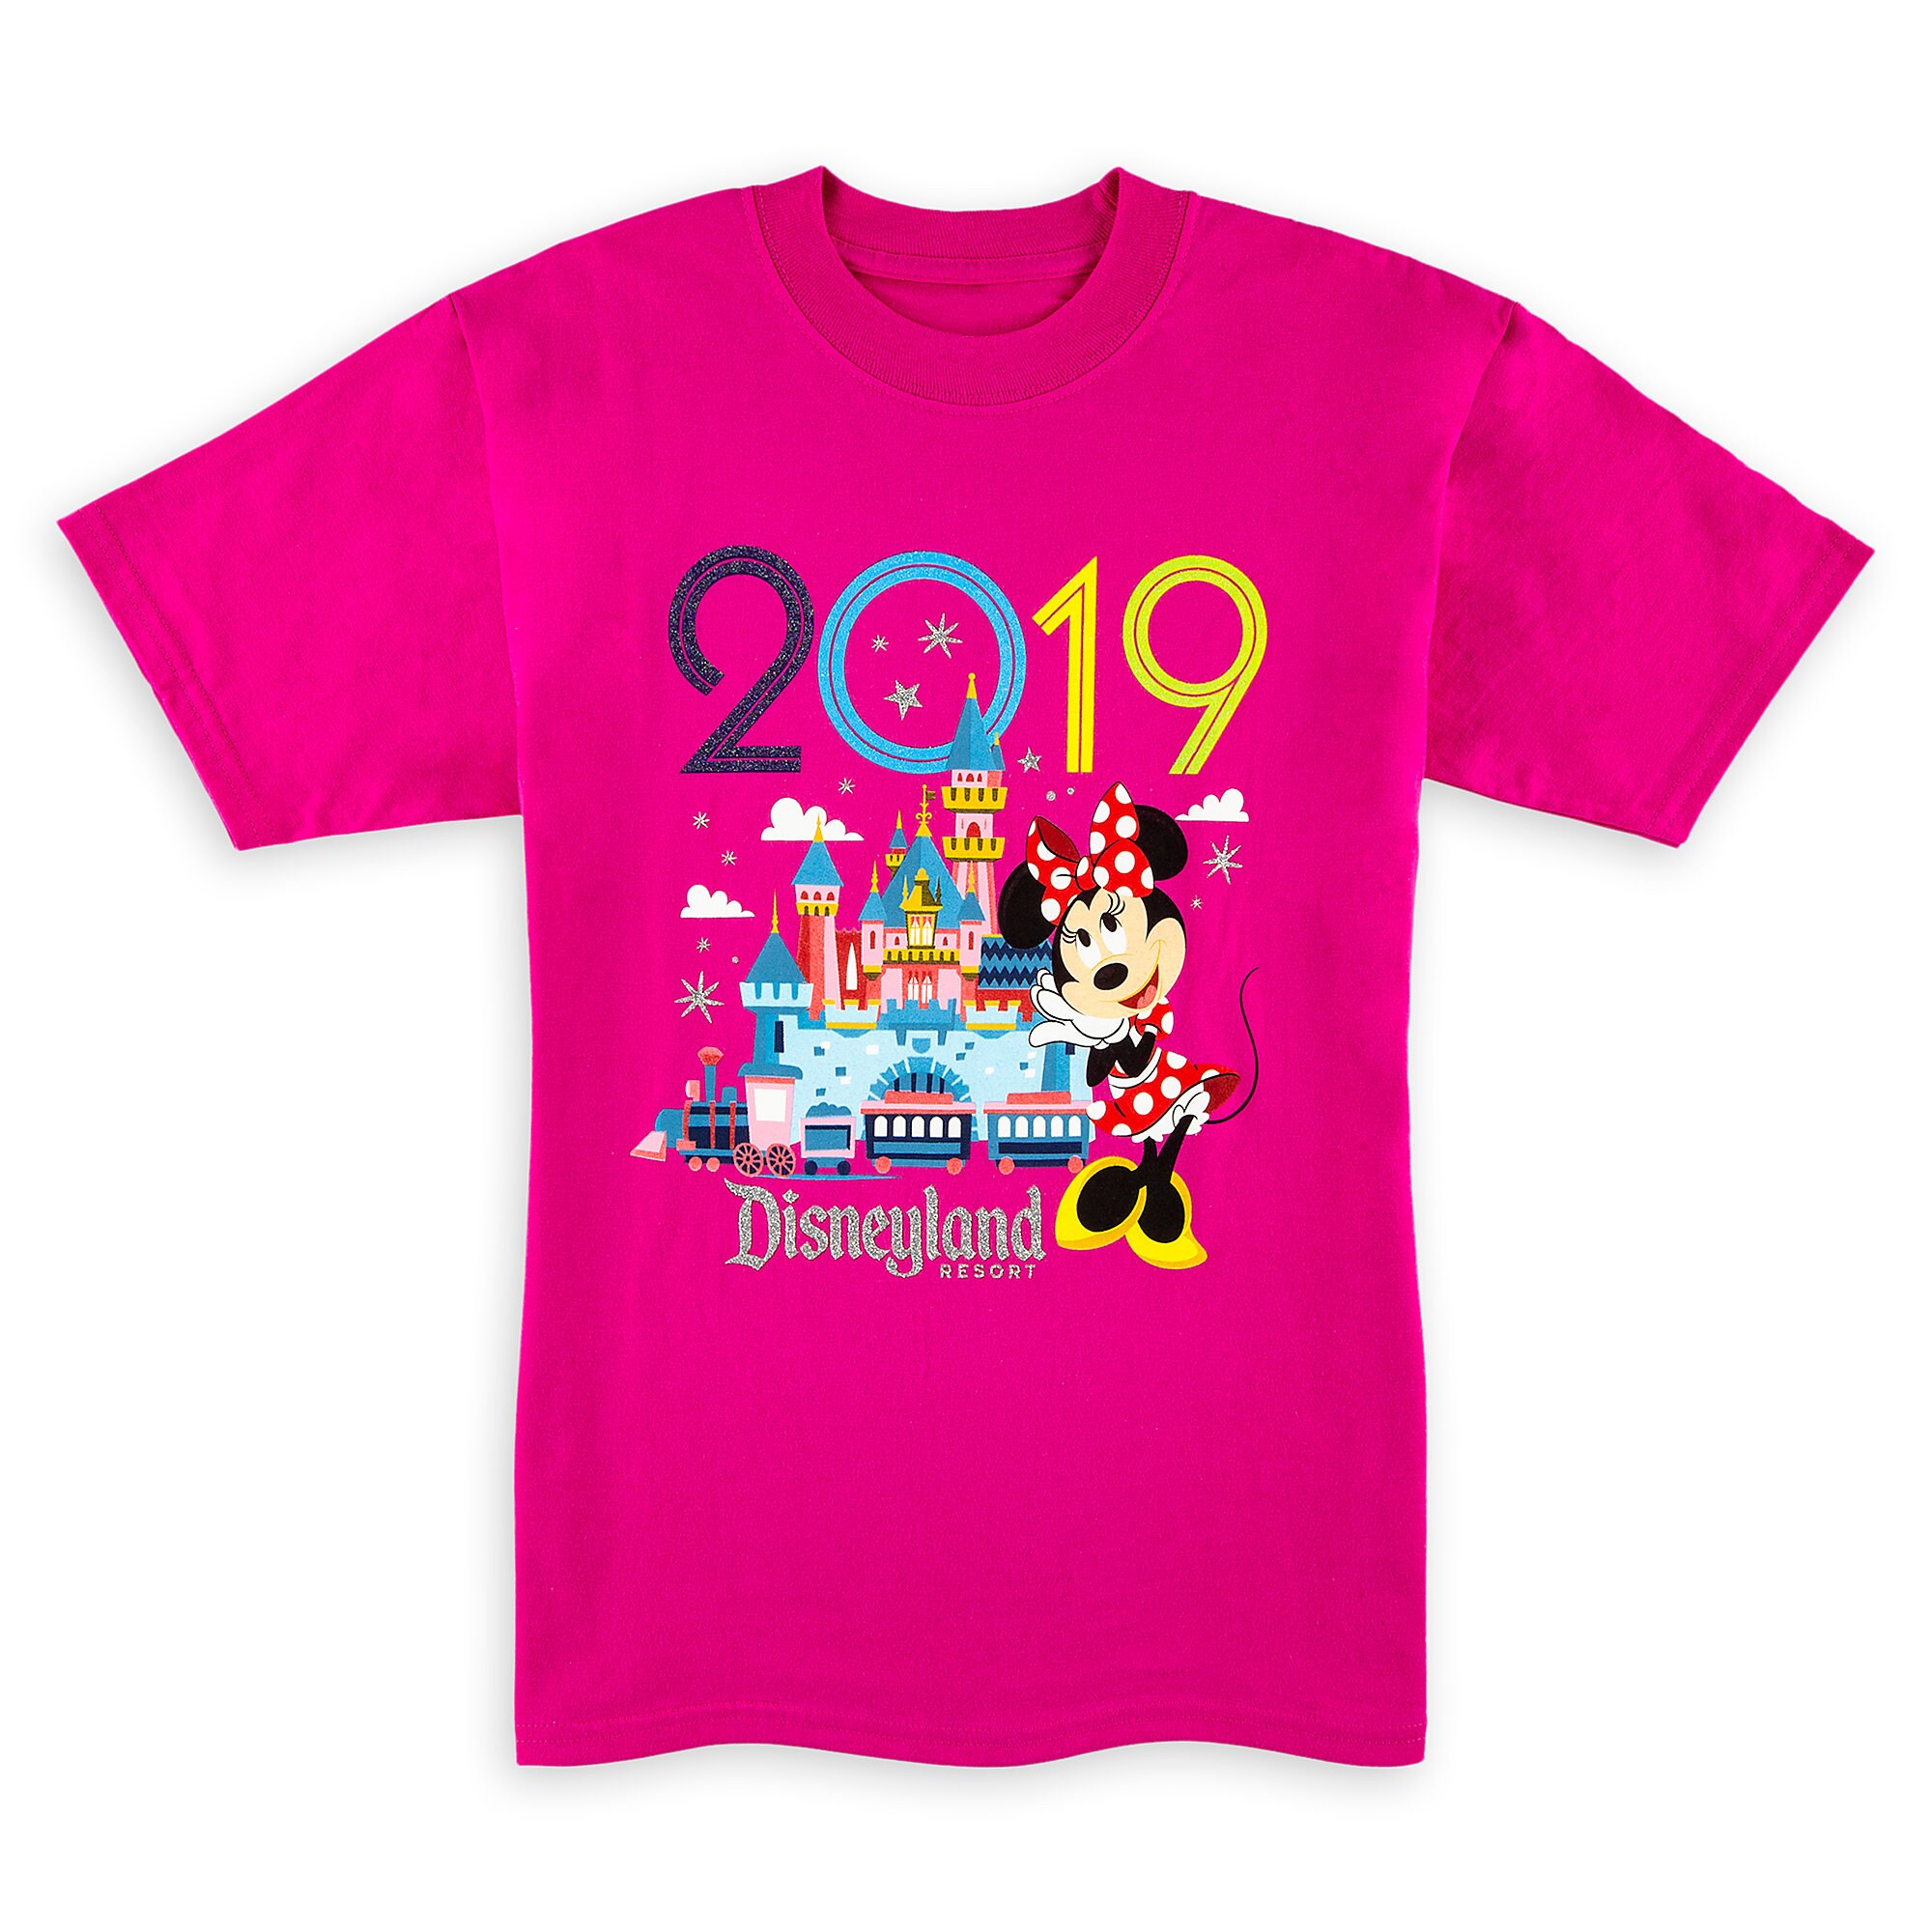 Minnie Mouse T-Shirt for Kids - Disneyland 2019